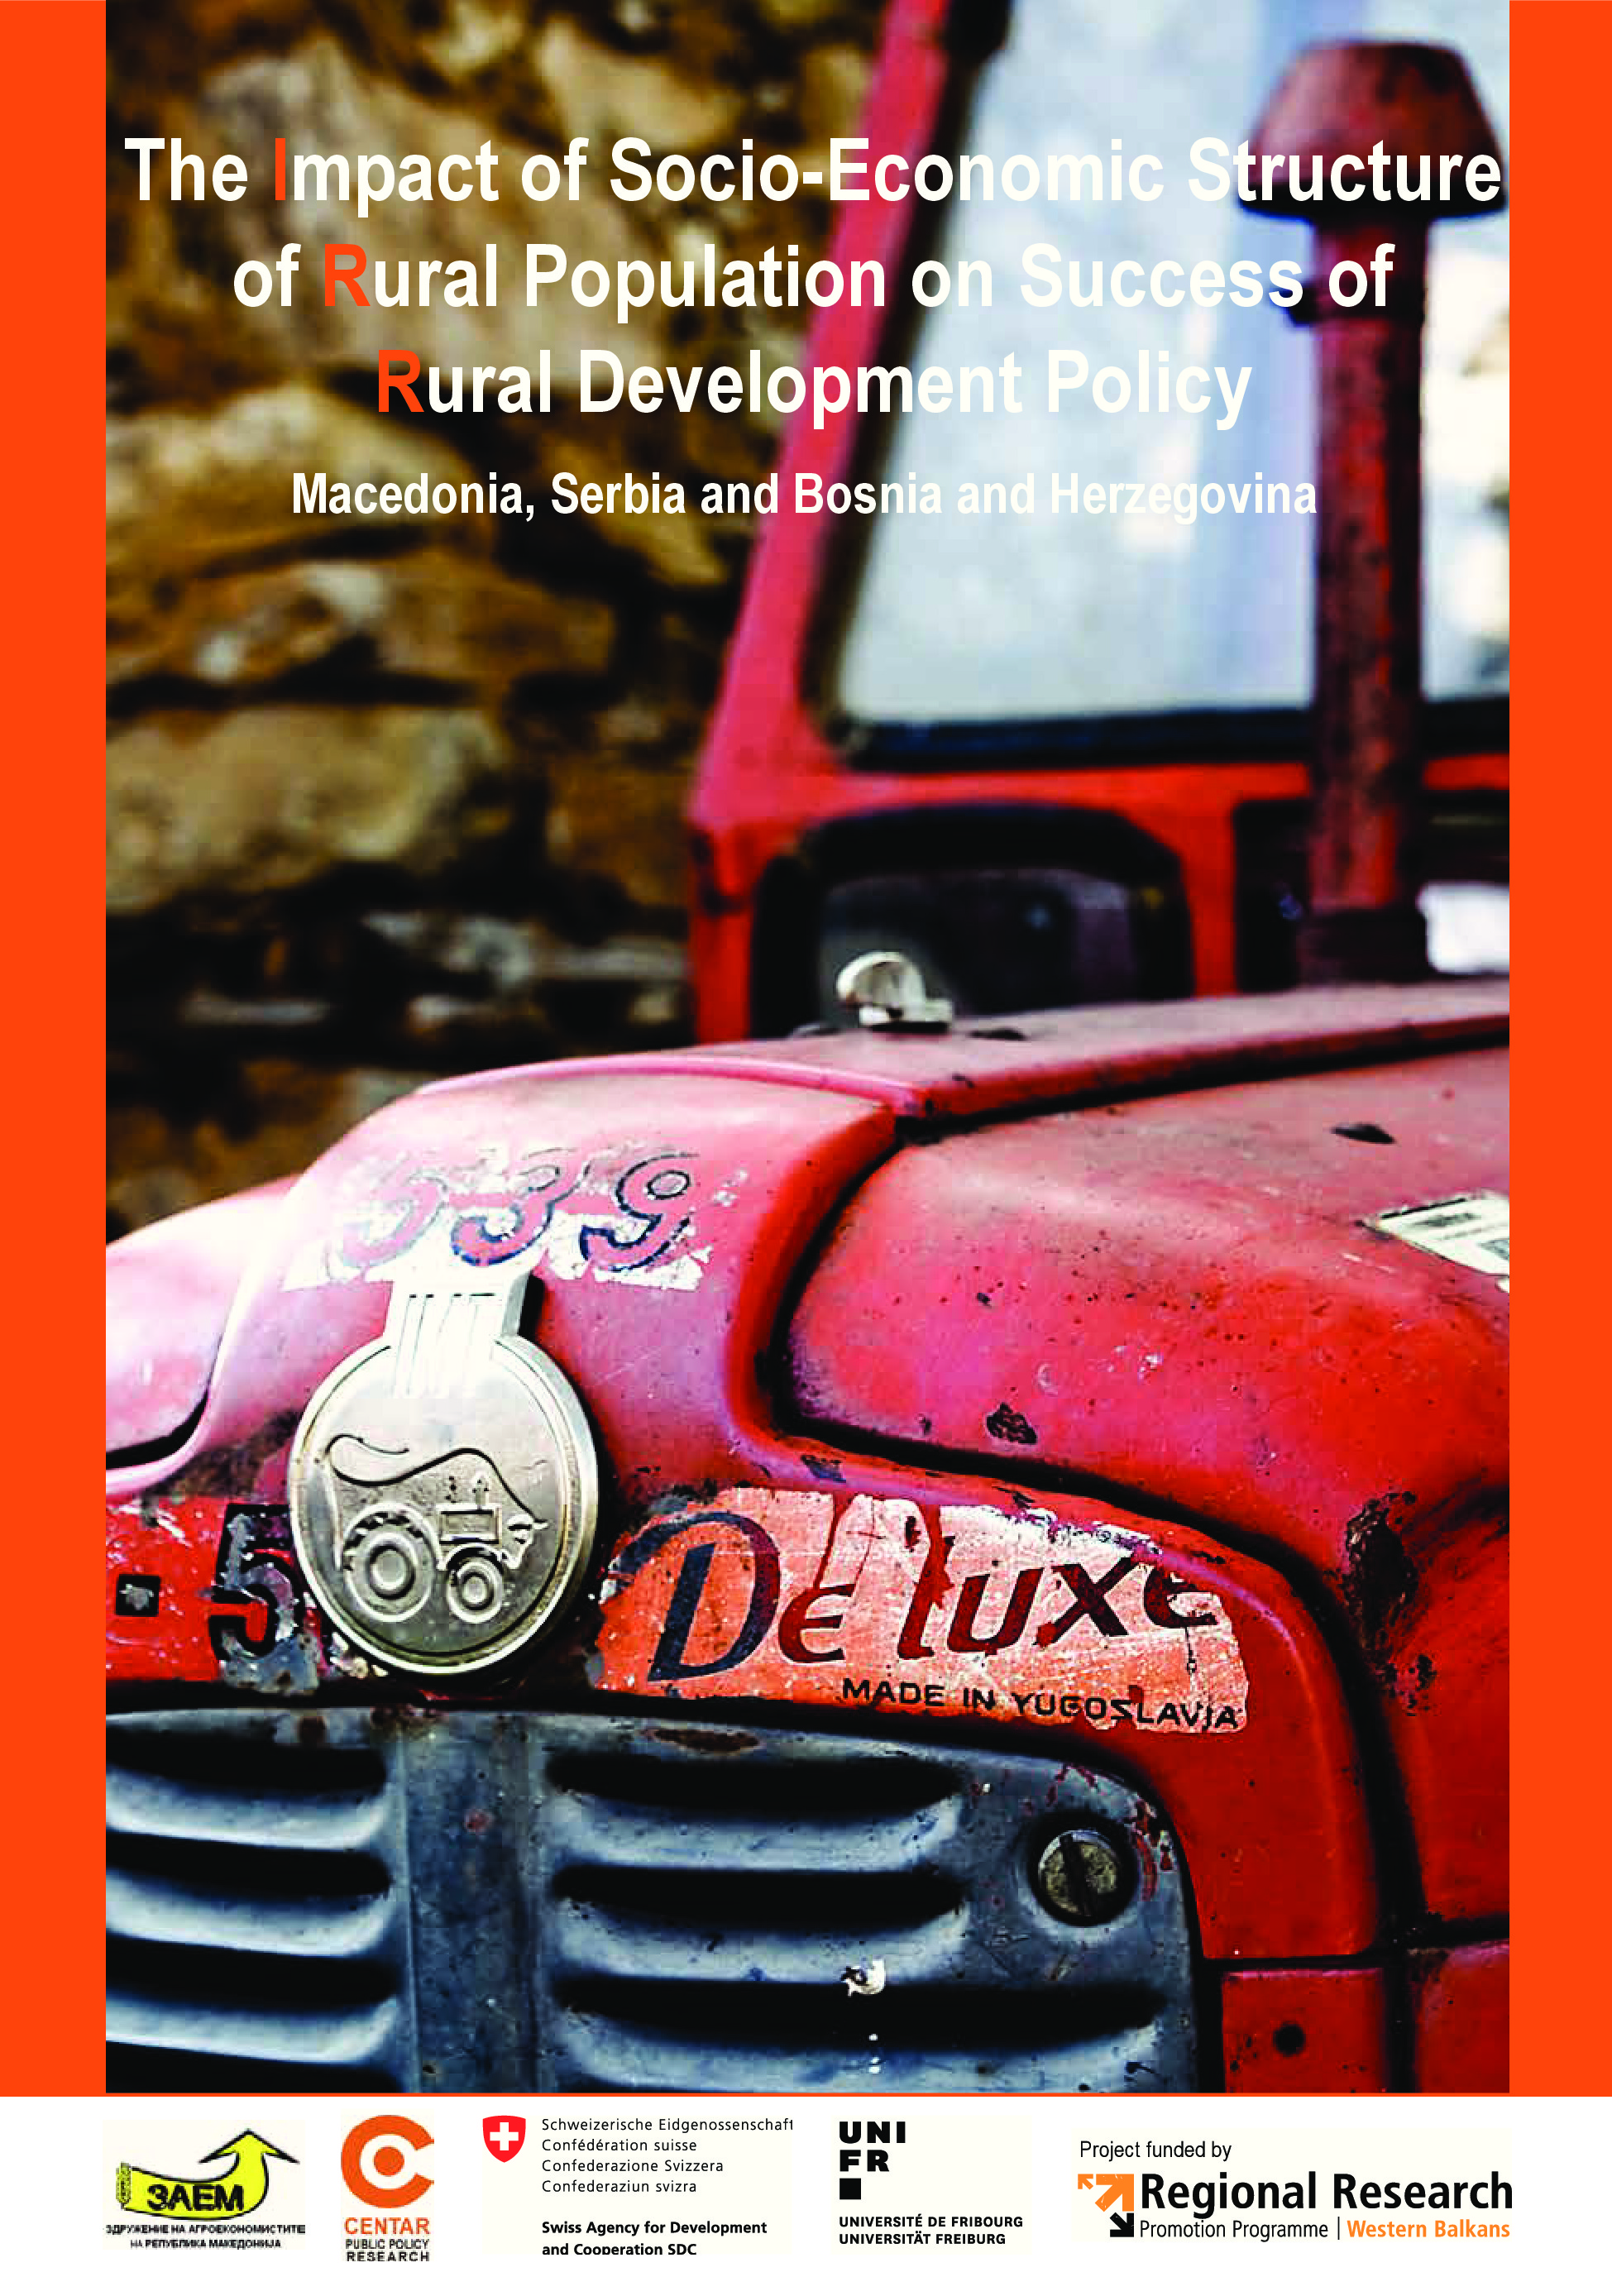 The Monograph: The Impact of the Socio-economic structure of Rural Population on Success of Rural Development Policy in Macedonia, Bosnia and Herzegovina and Serbia